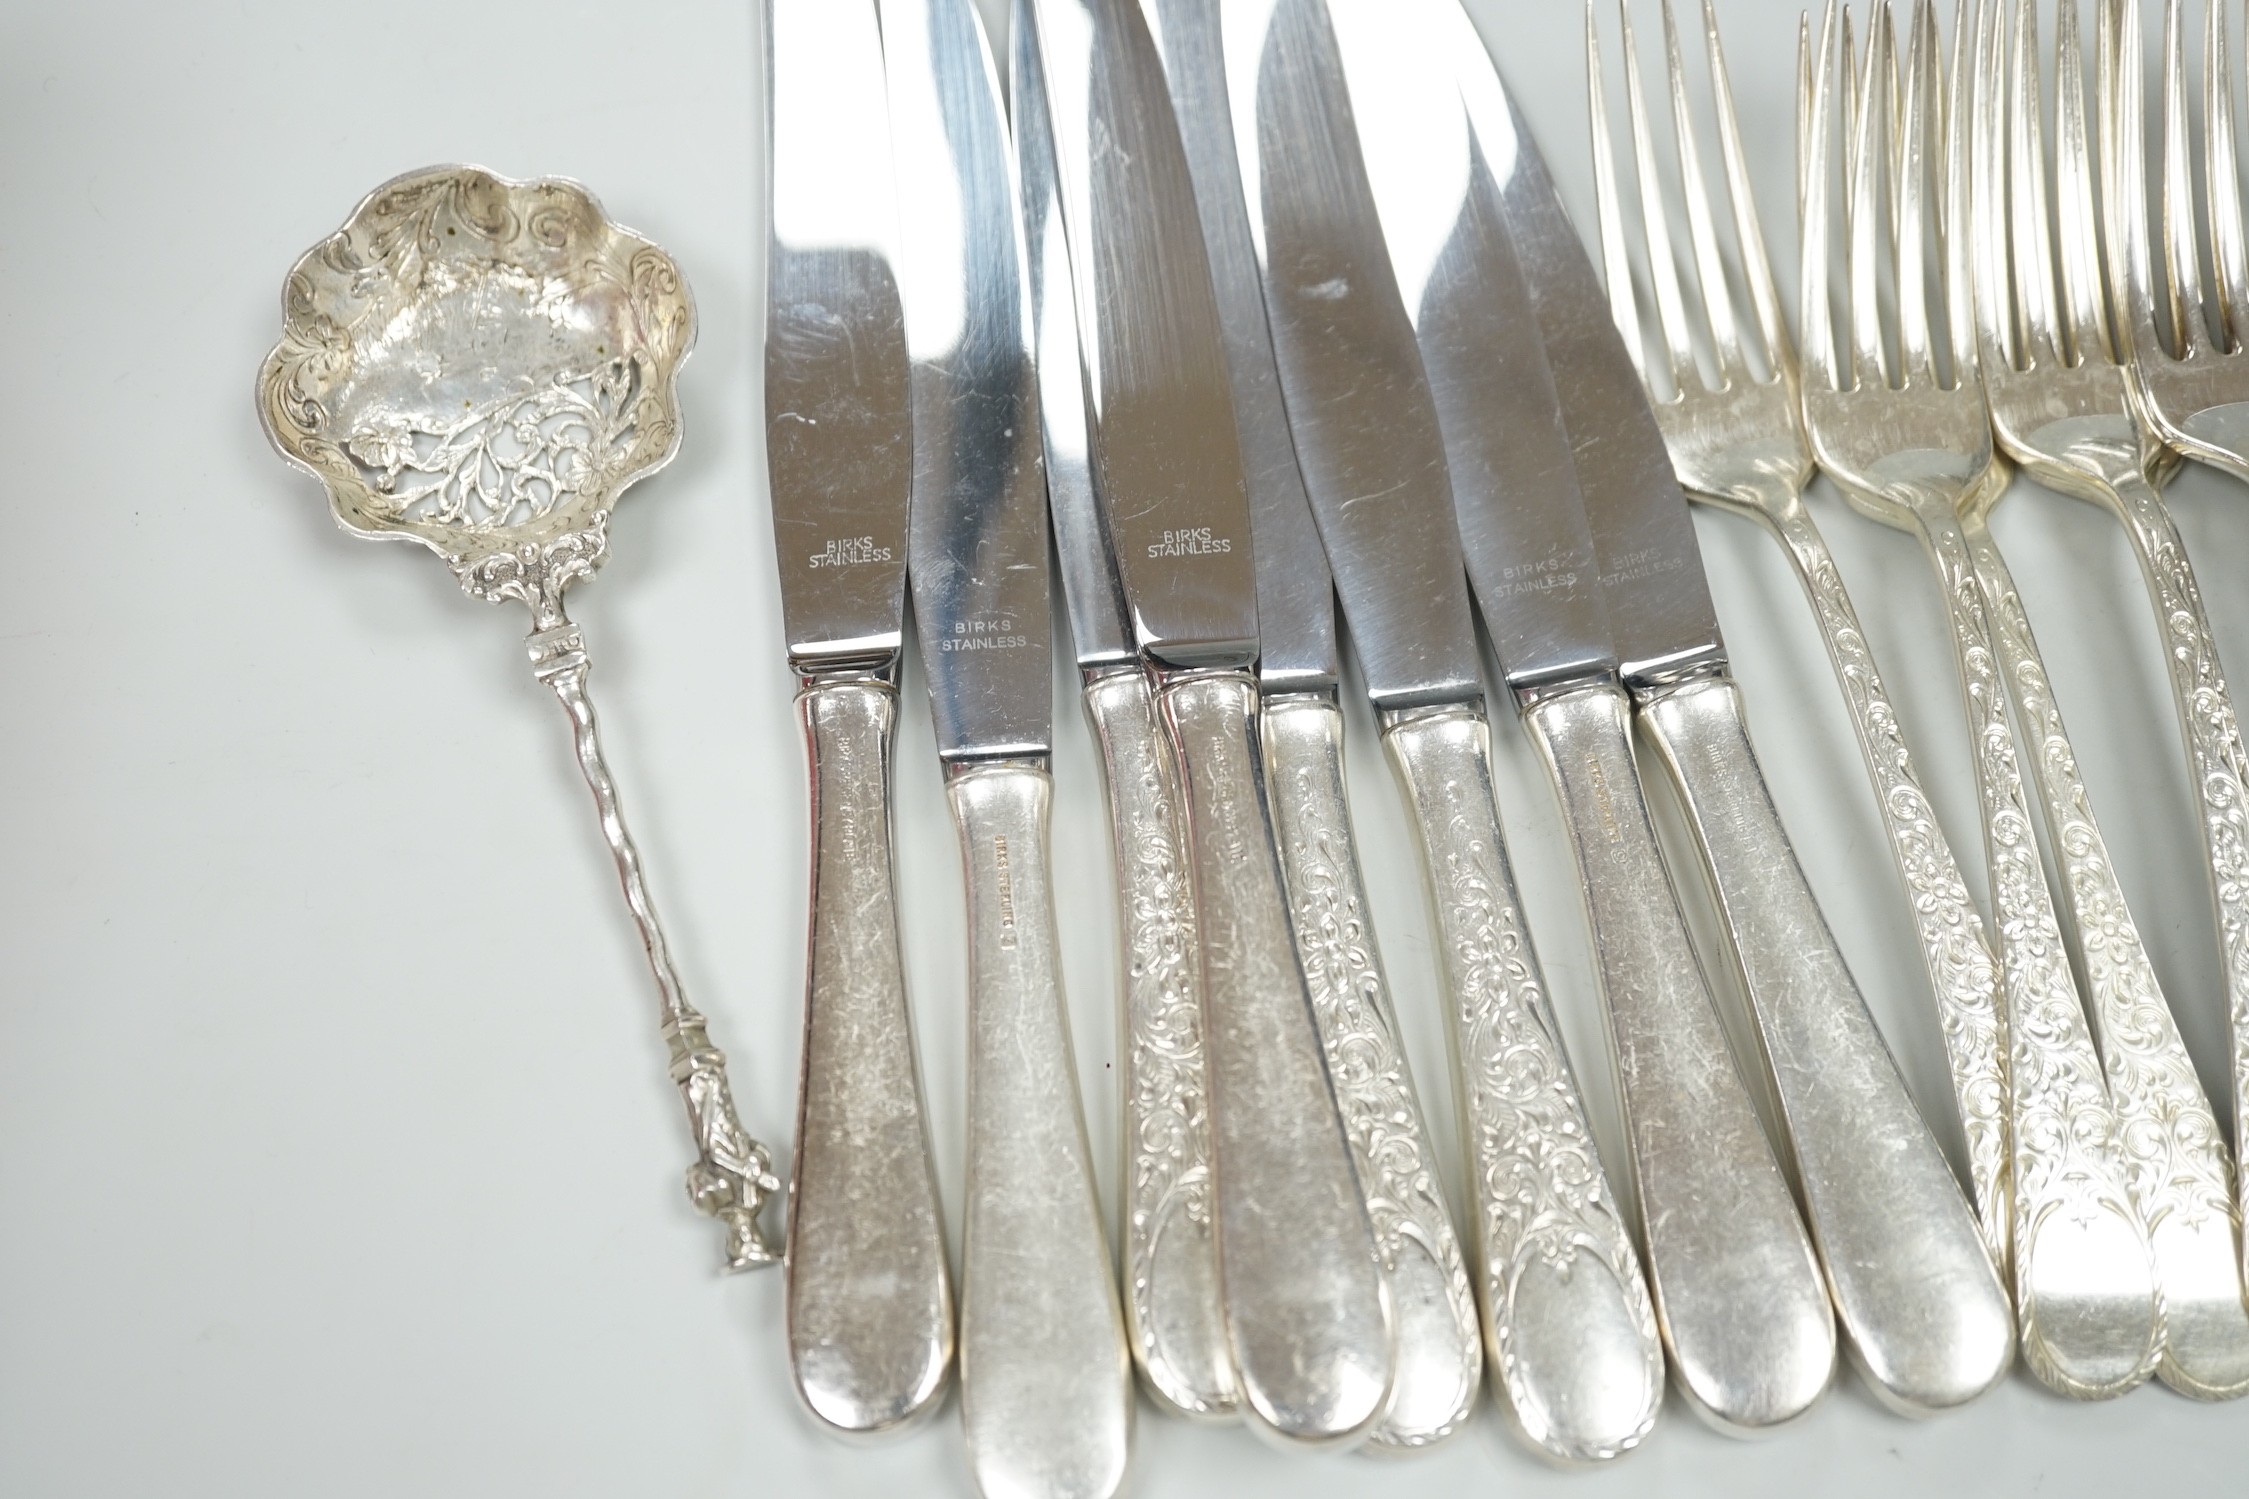 Five Canadian Birks sterling table forks, one sterling teaspoon and six sterling handled table knives, together with seven items of sterling flatware, a Hanau white metal ornate spoon and fifteen items of Birks Regency p